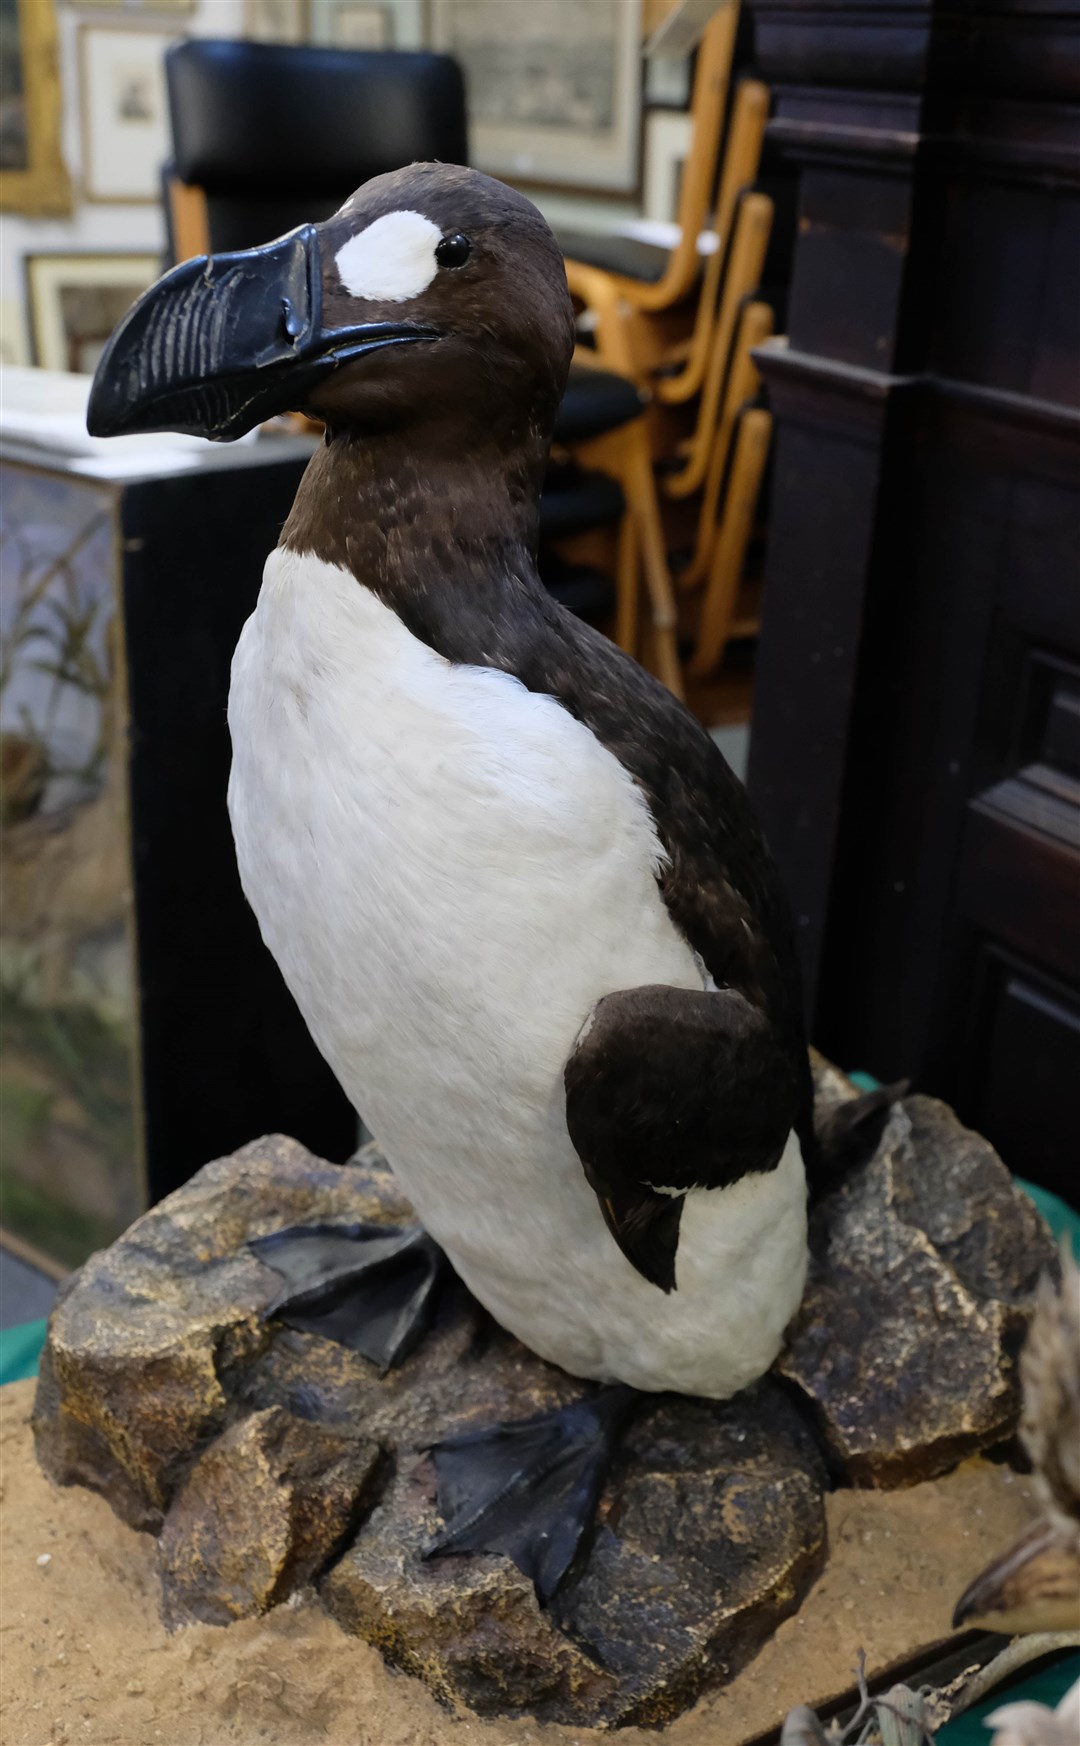 The great auk sold for £25,000 to a French collector (Dominic Winter Auctions/PA)